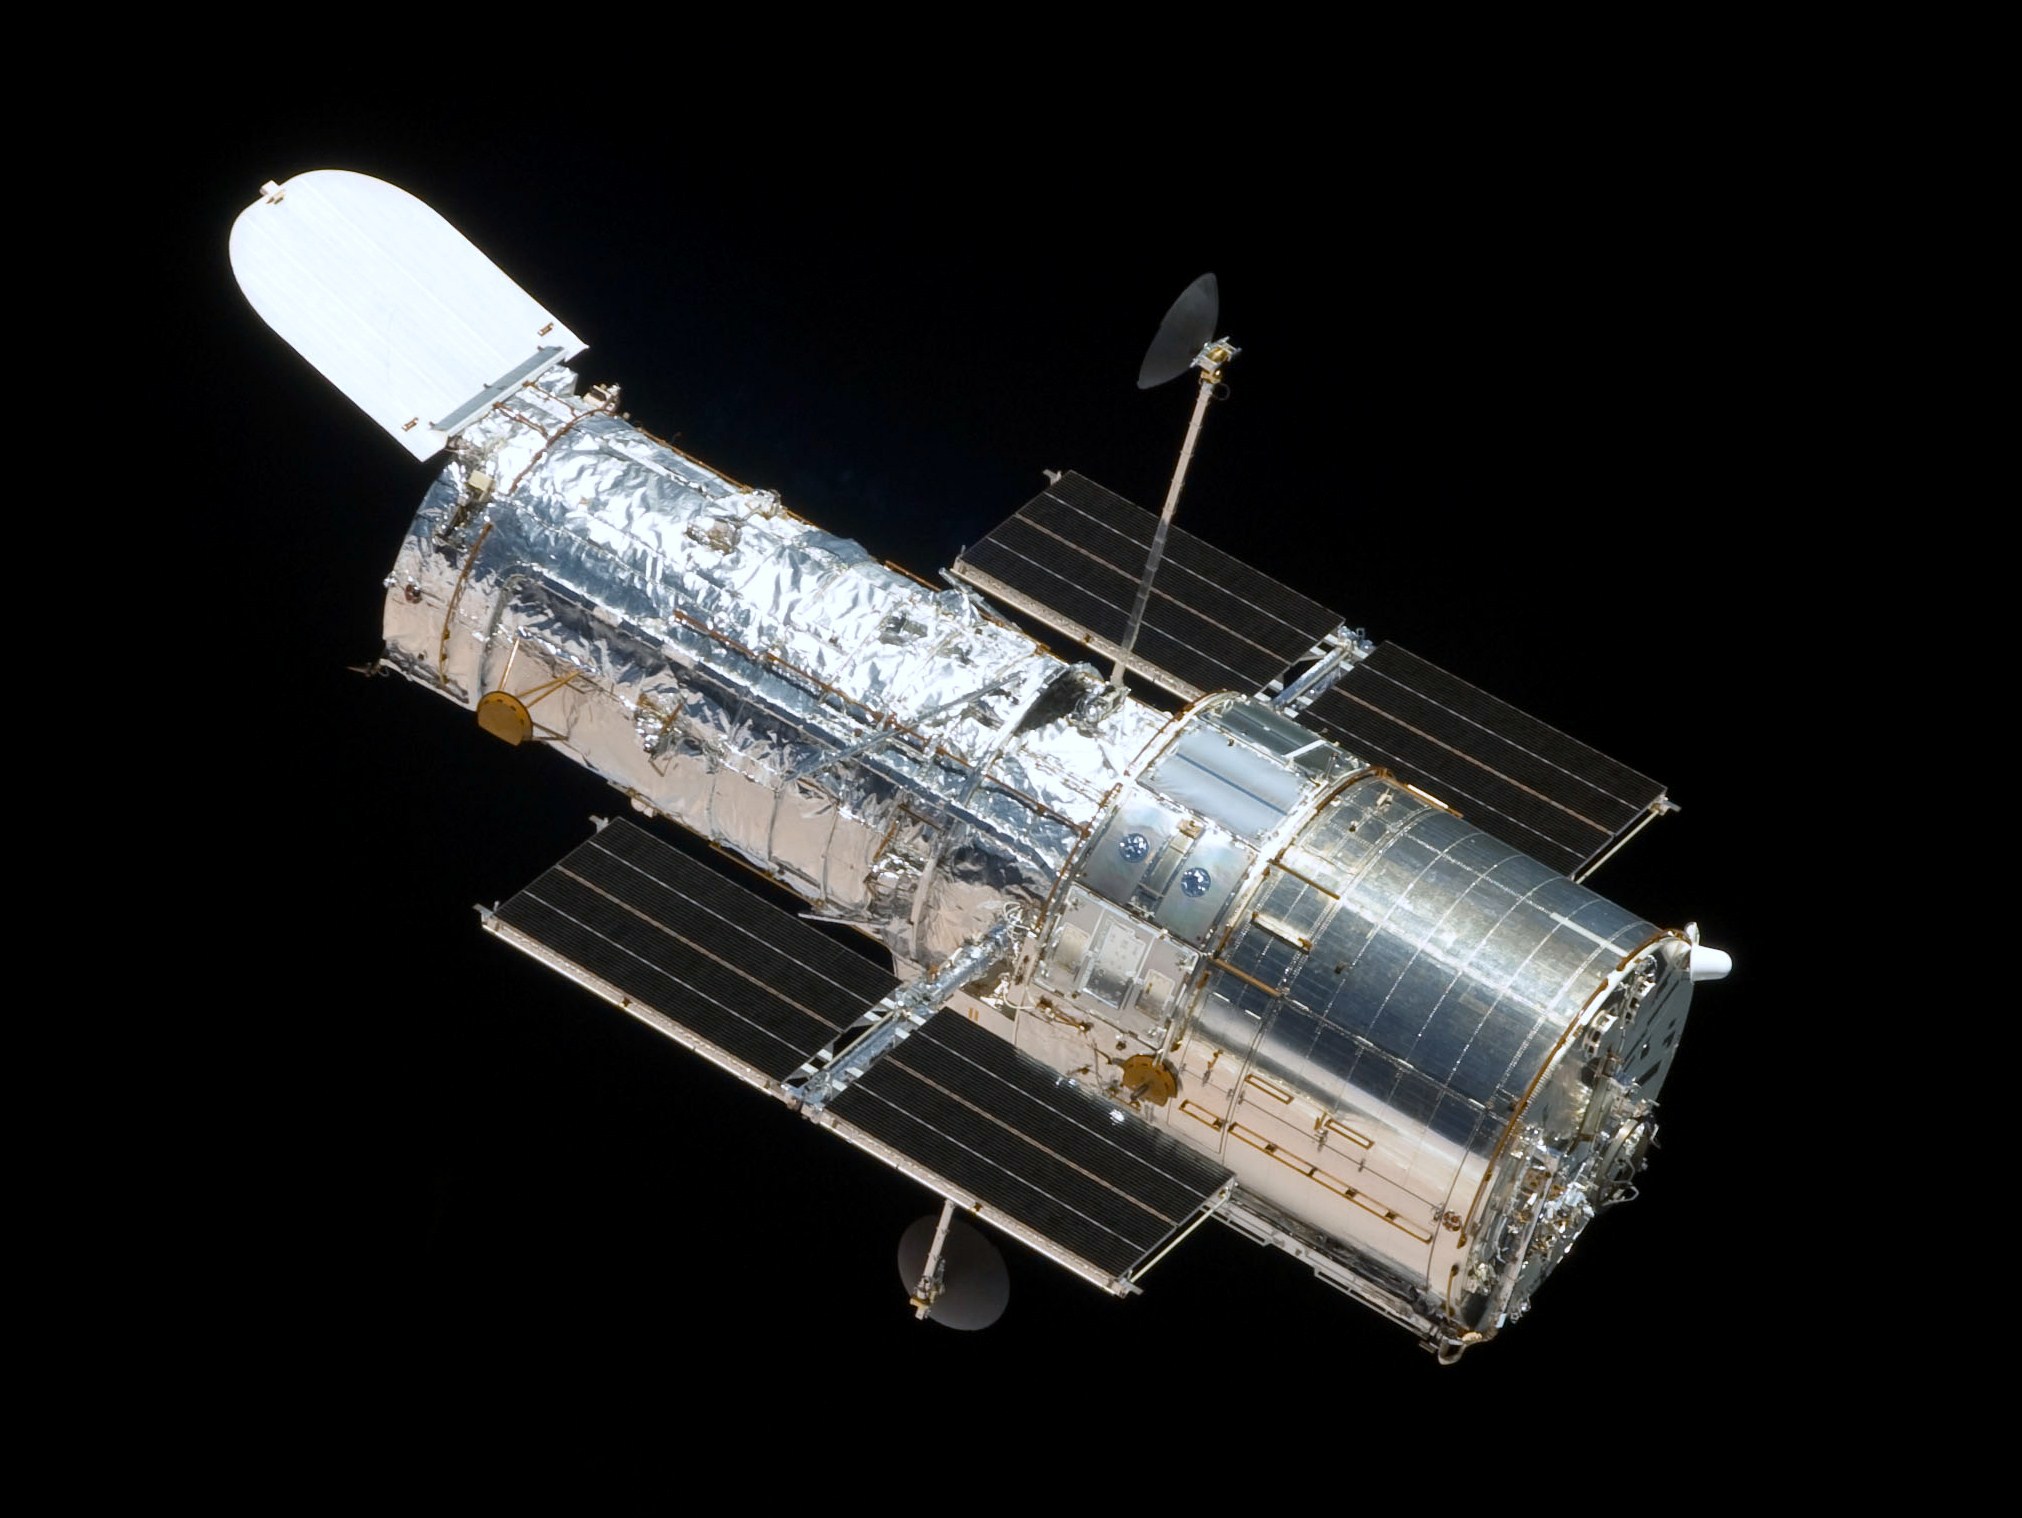 About the Hubble Space Telescope | NASA